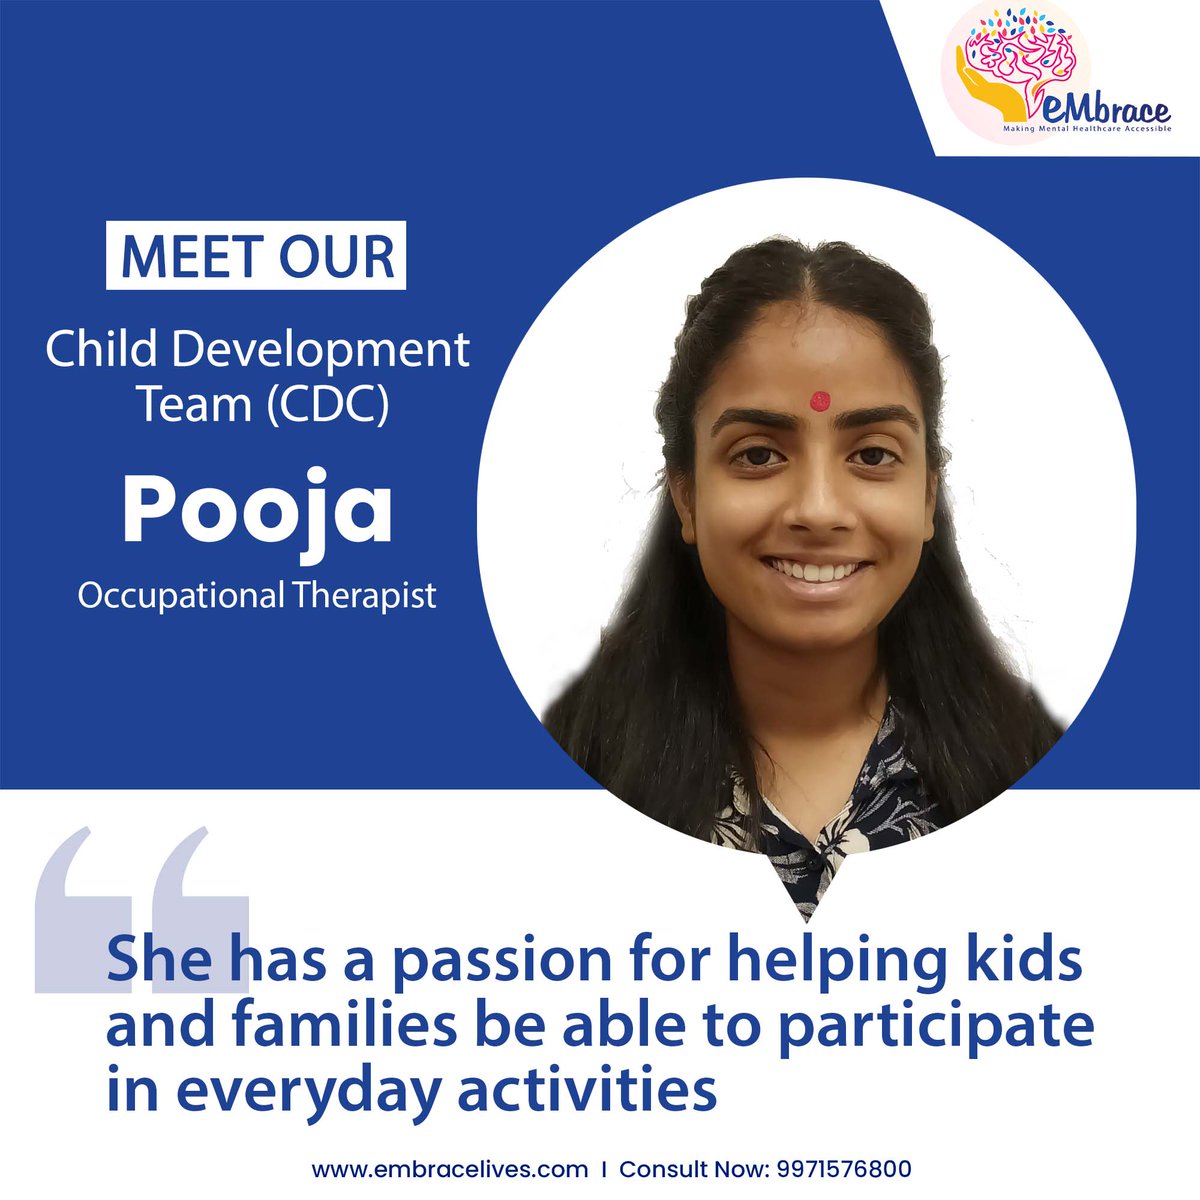 Say hello to Pooja, our  occupational therapist! 🎨🧒 Her creativity and dedication are helping children reach new heights of potential. 🌈

Visit us : embracelives.com

 #ChildDevelopment #eMbraceLives #childrensmentalhealth #childdevelopmentspecialist #ChildTherapist